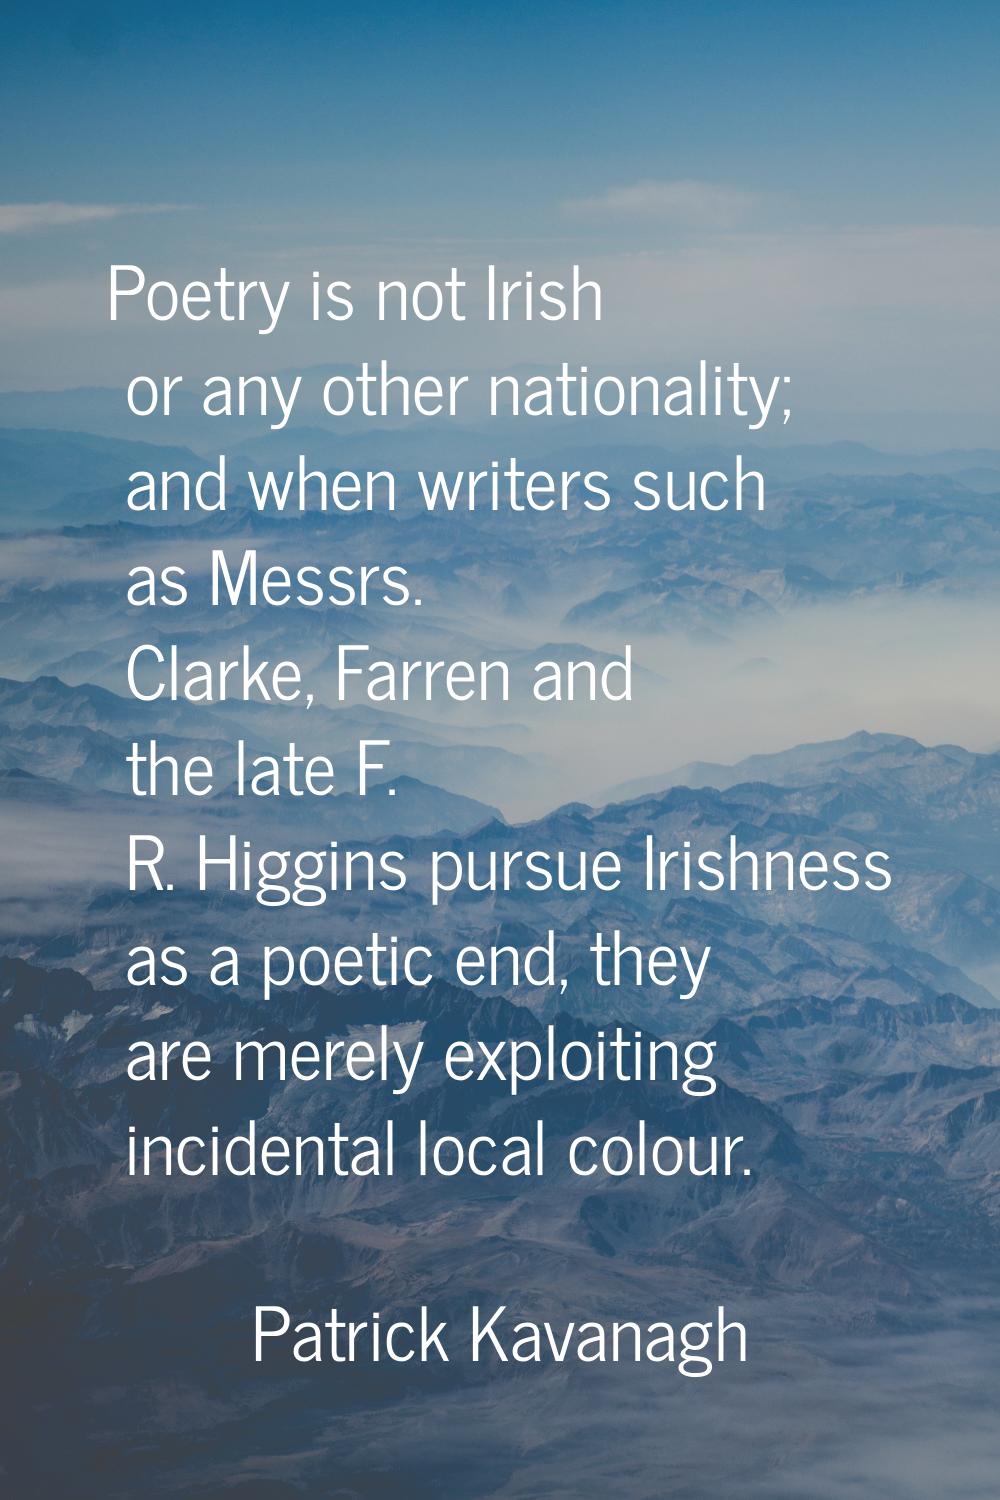 Poetry is not Irish or any other nationality; and when writers such as Messrs. Clarke, Farren and t